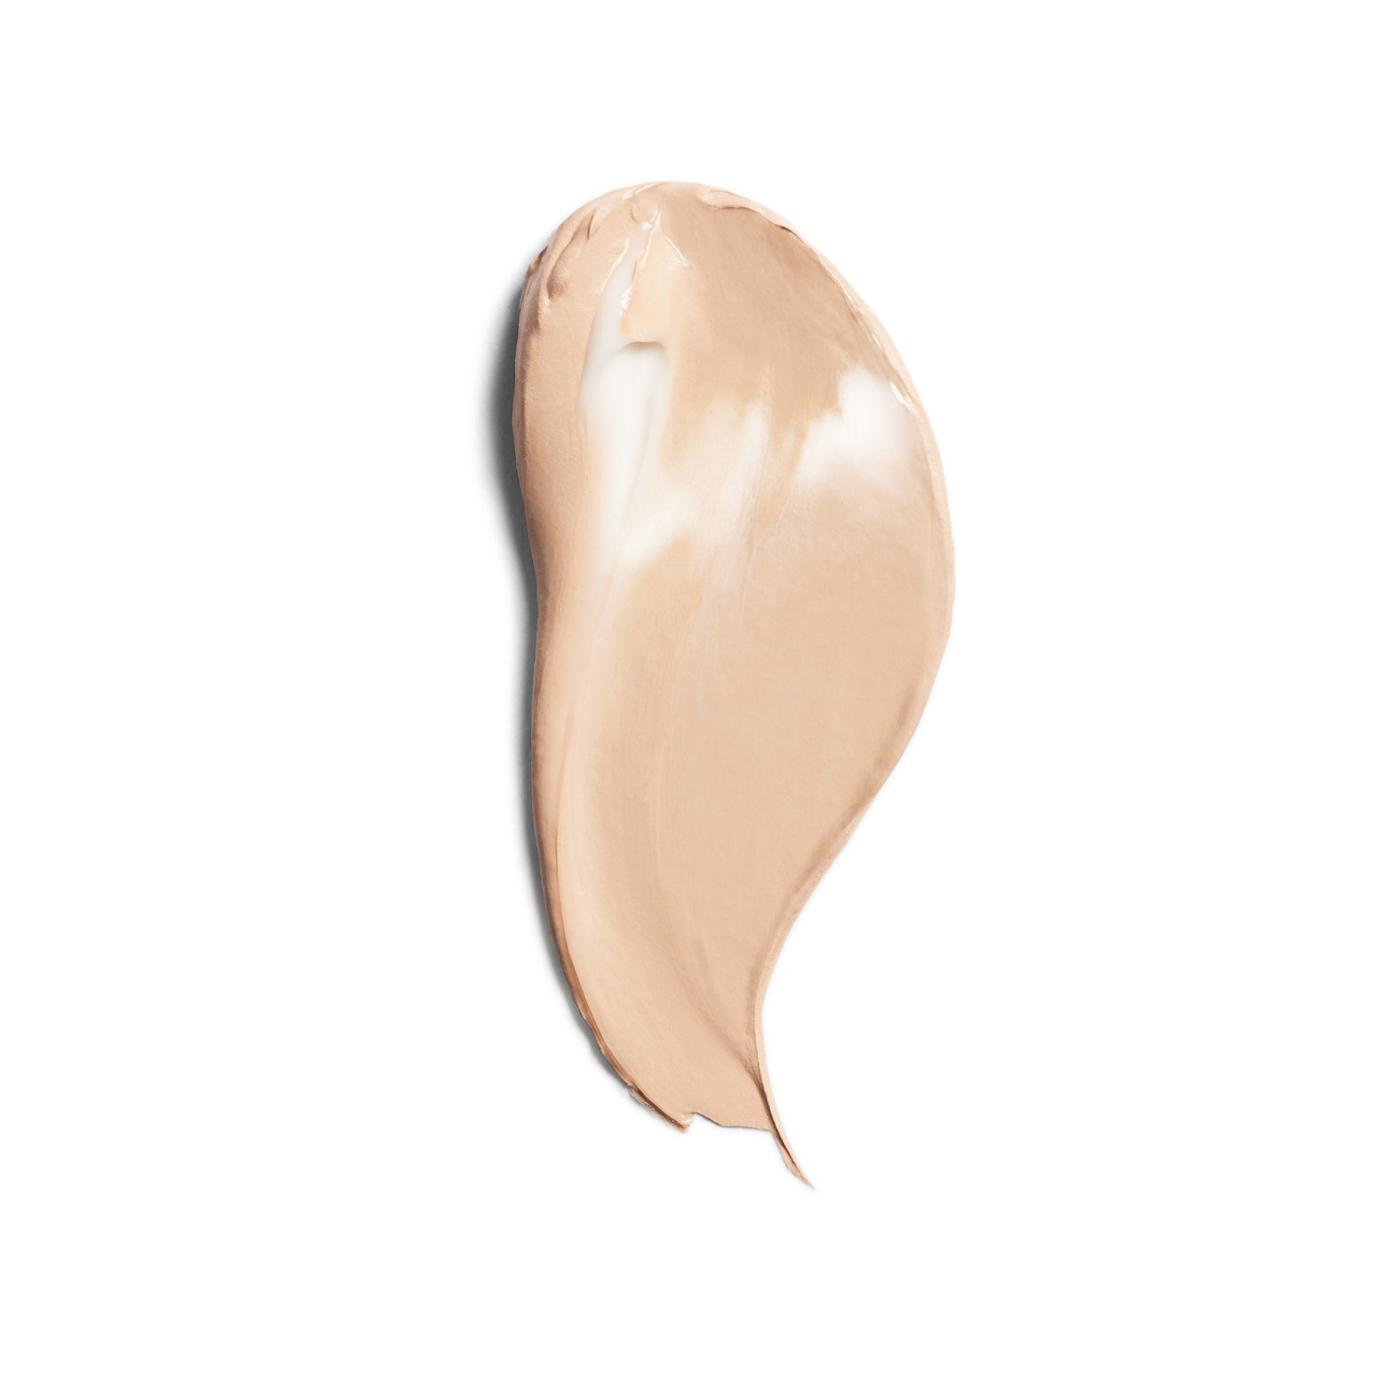 Covergirl Simply Ageless Wrinkle Defying Foundation 230 Classic Beige; image 7 of 8